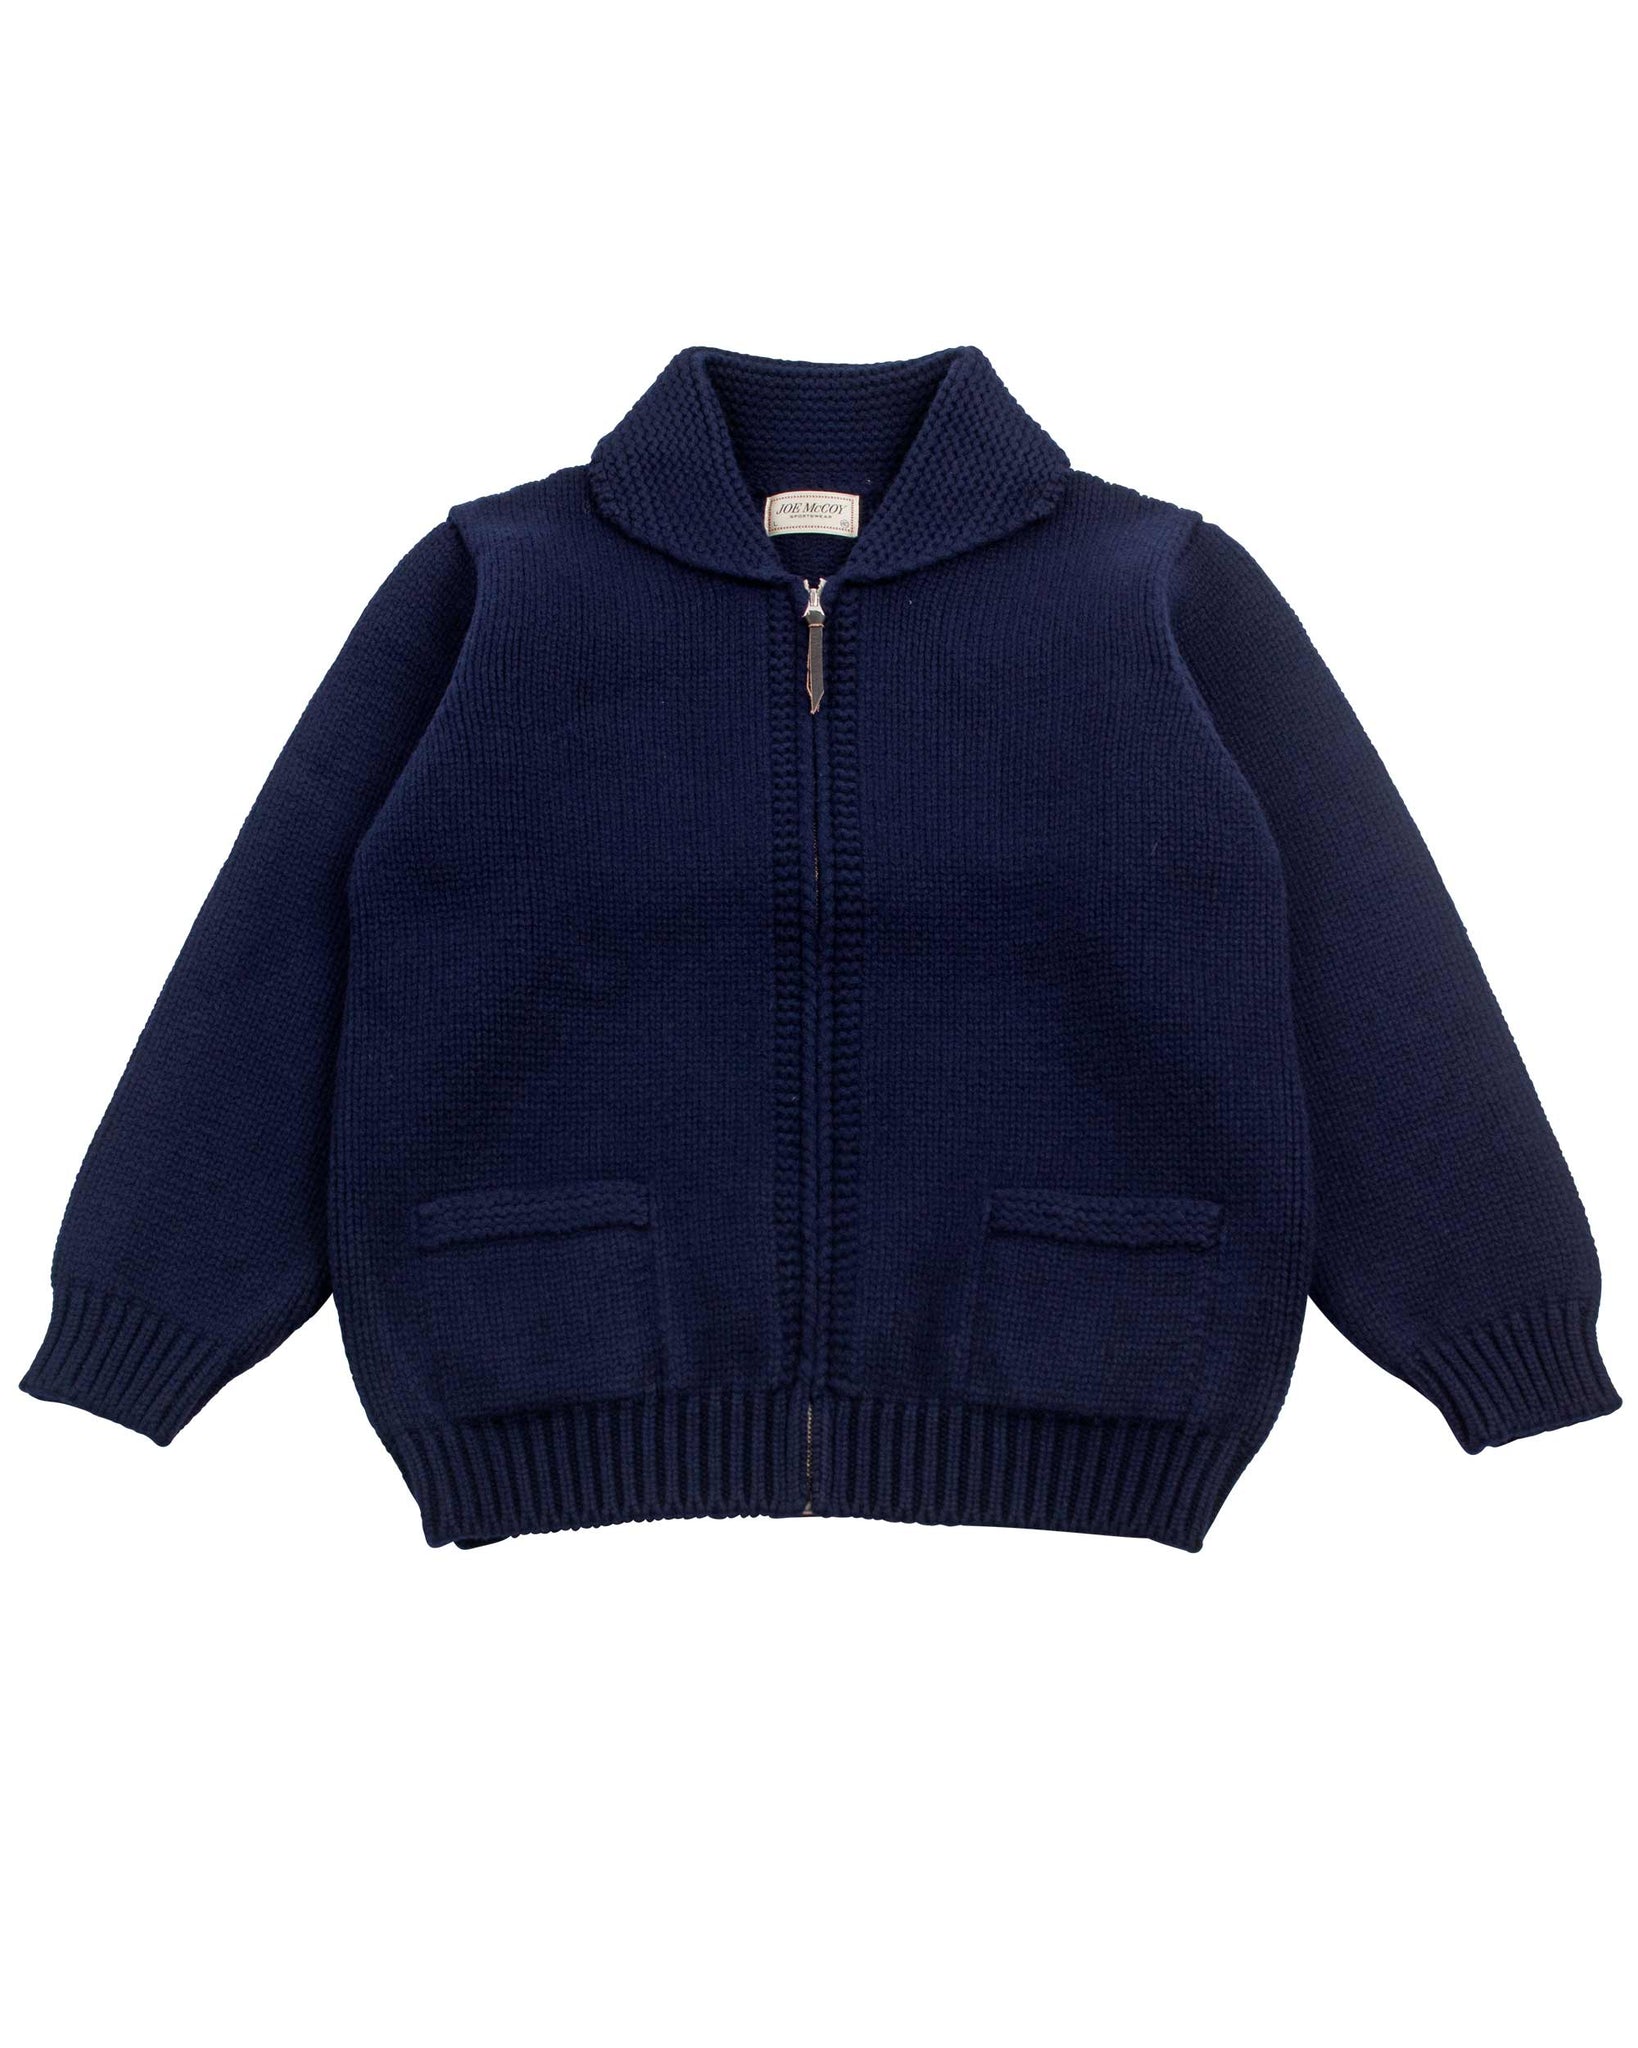 The Real McCoy's MC21113 Heavy Wool Cashmere Sweater Navy